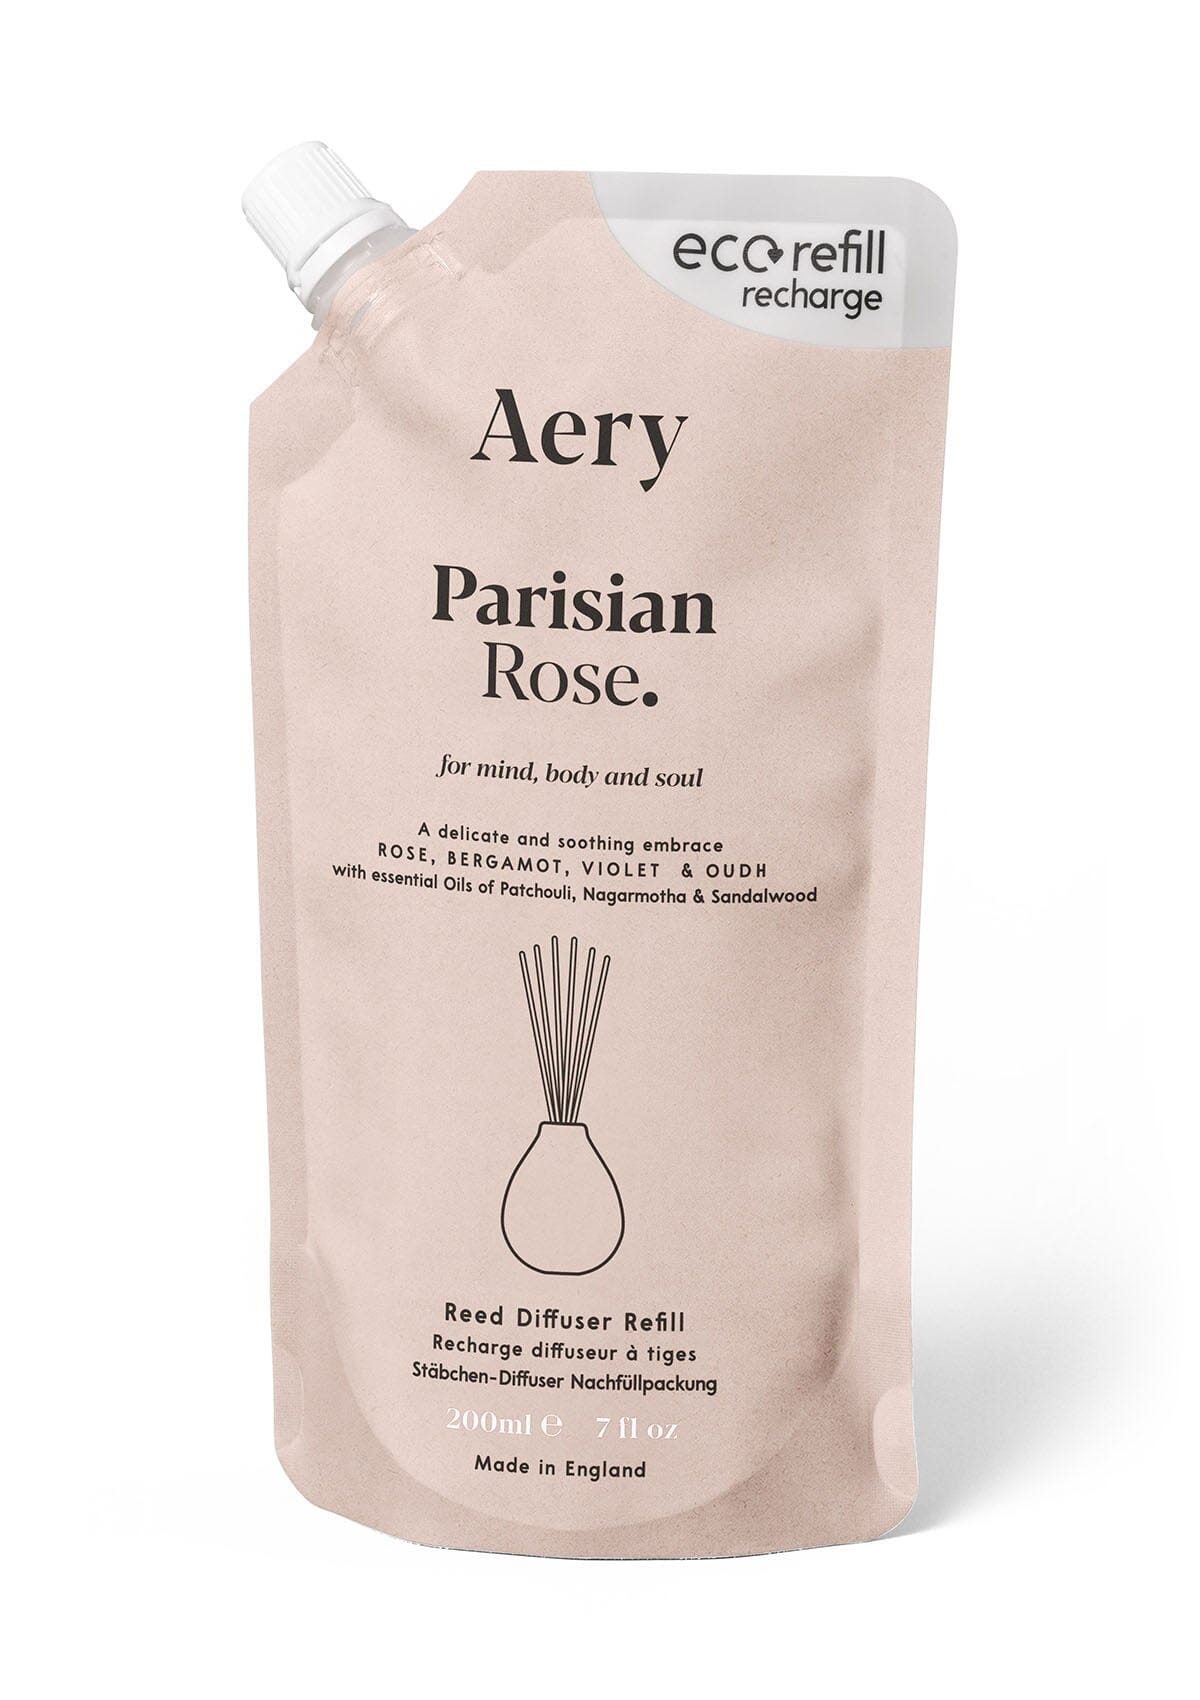 Pink Parisian Rose reed diffuser refill pouch by aery displayed on white background 